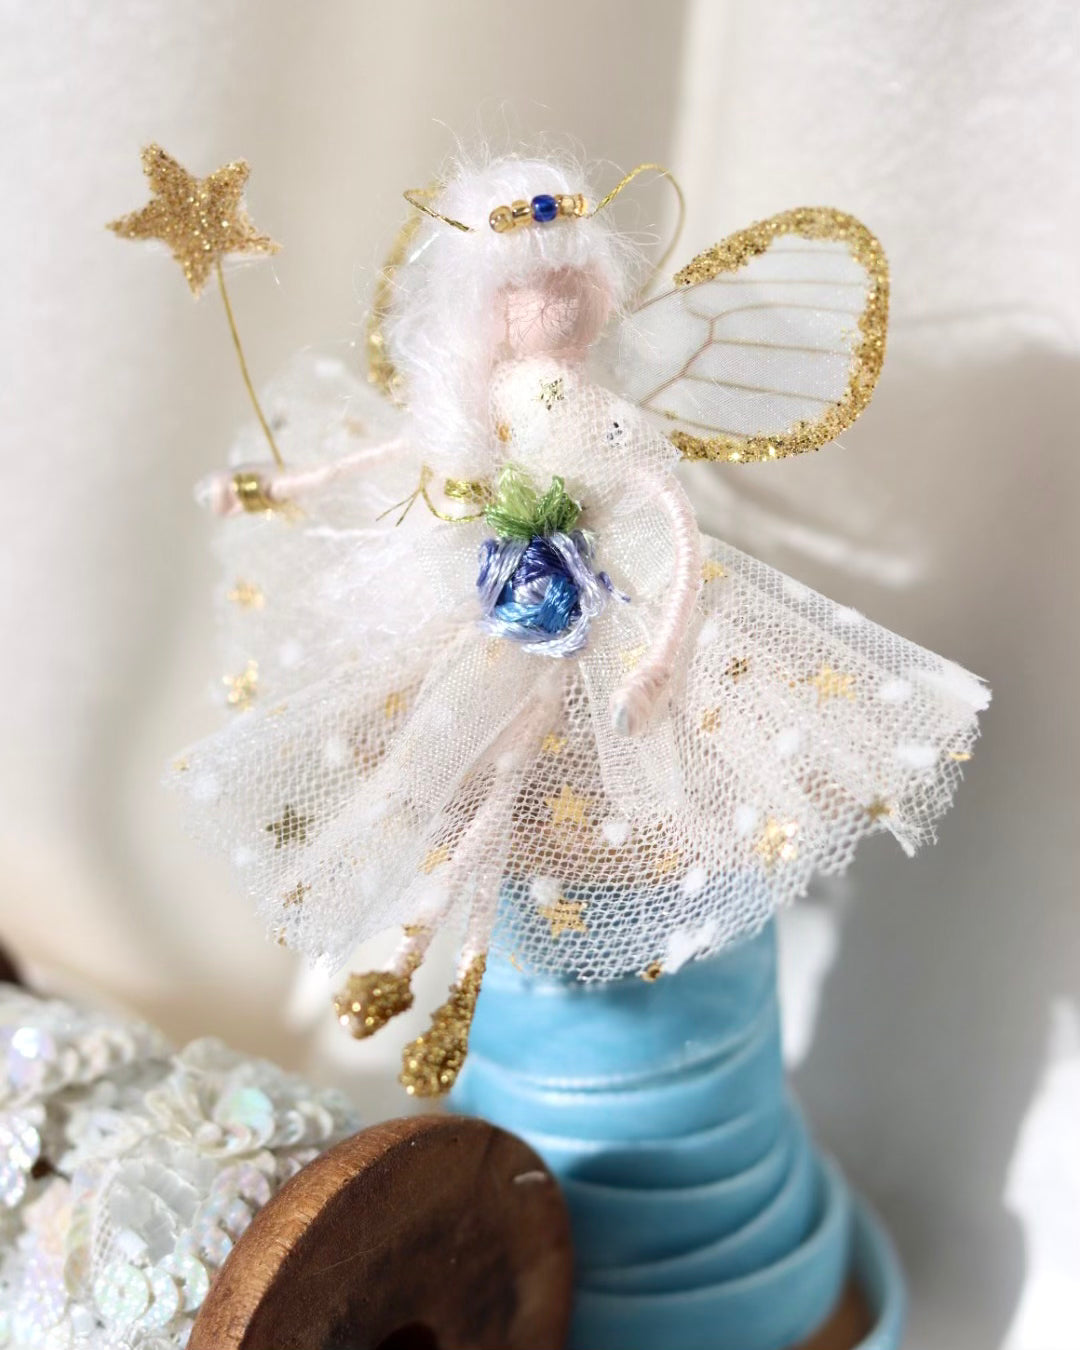 This little fairy is dressed in a Gold star and white polka dot gown. She has sashed her gown at the waist with an Organza ribbon and a little blue embroidered rose trim. She has little shoes dipped in glitter and of course, her glittered wand brings you never-ending memories!